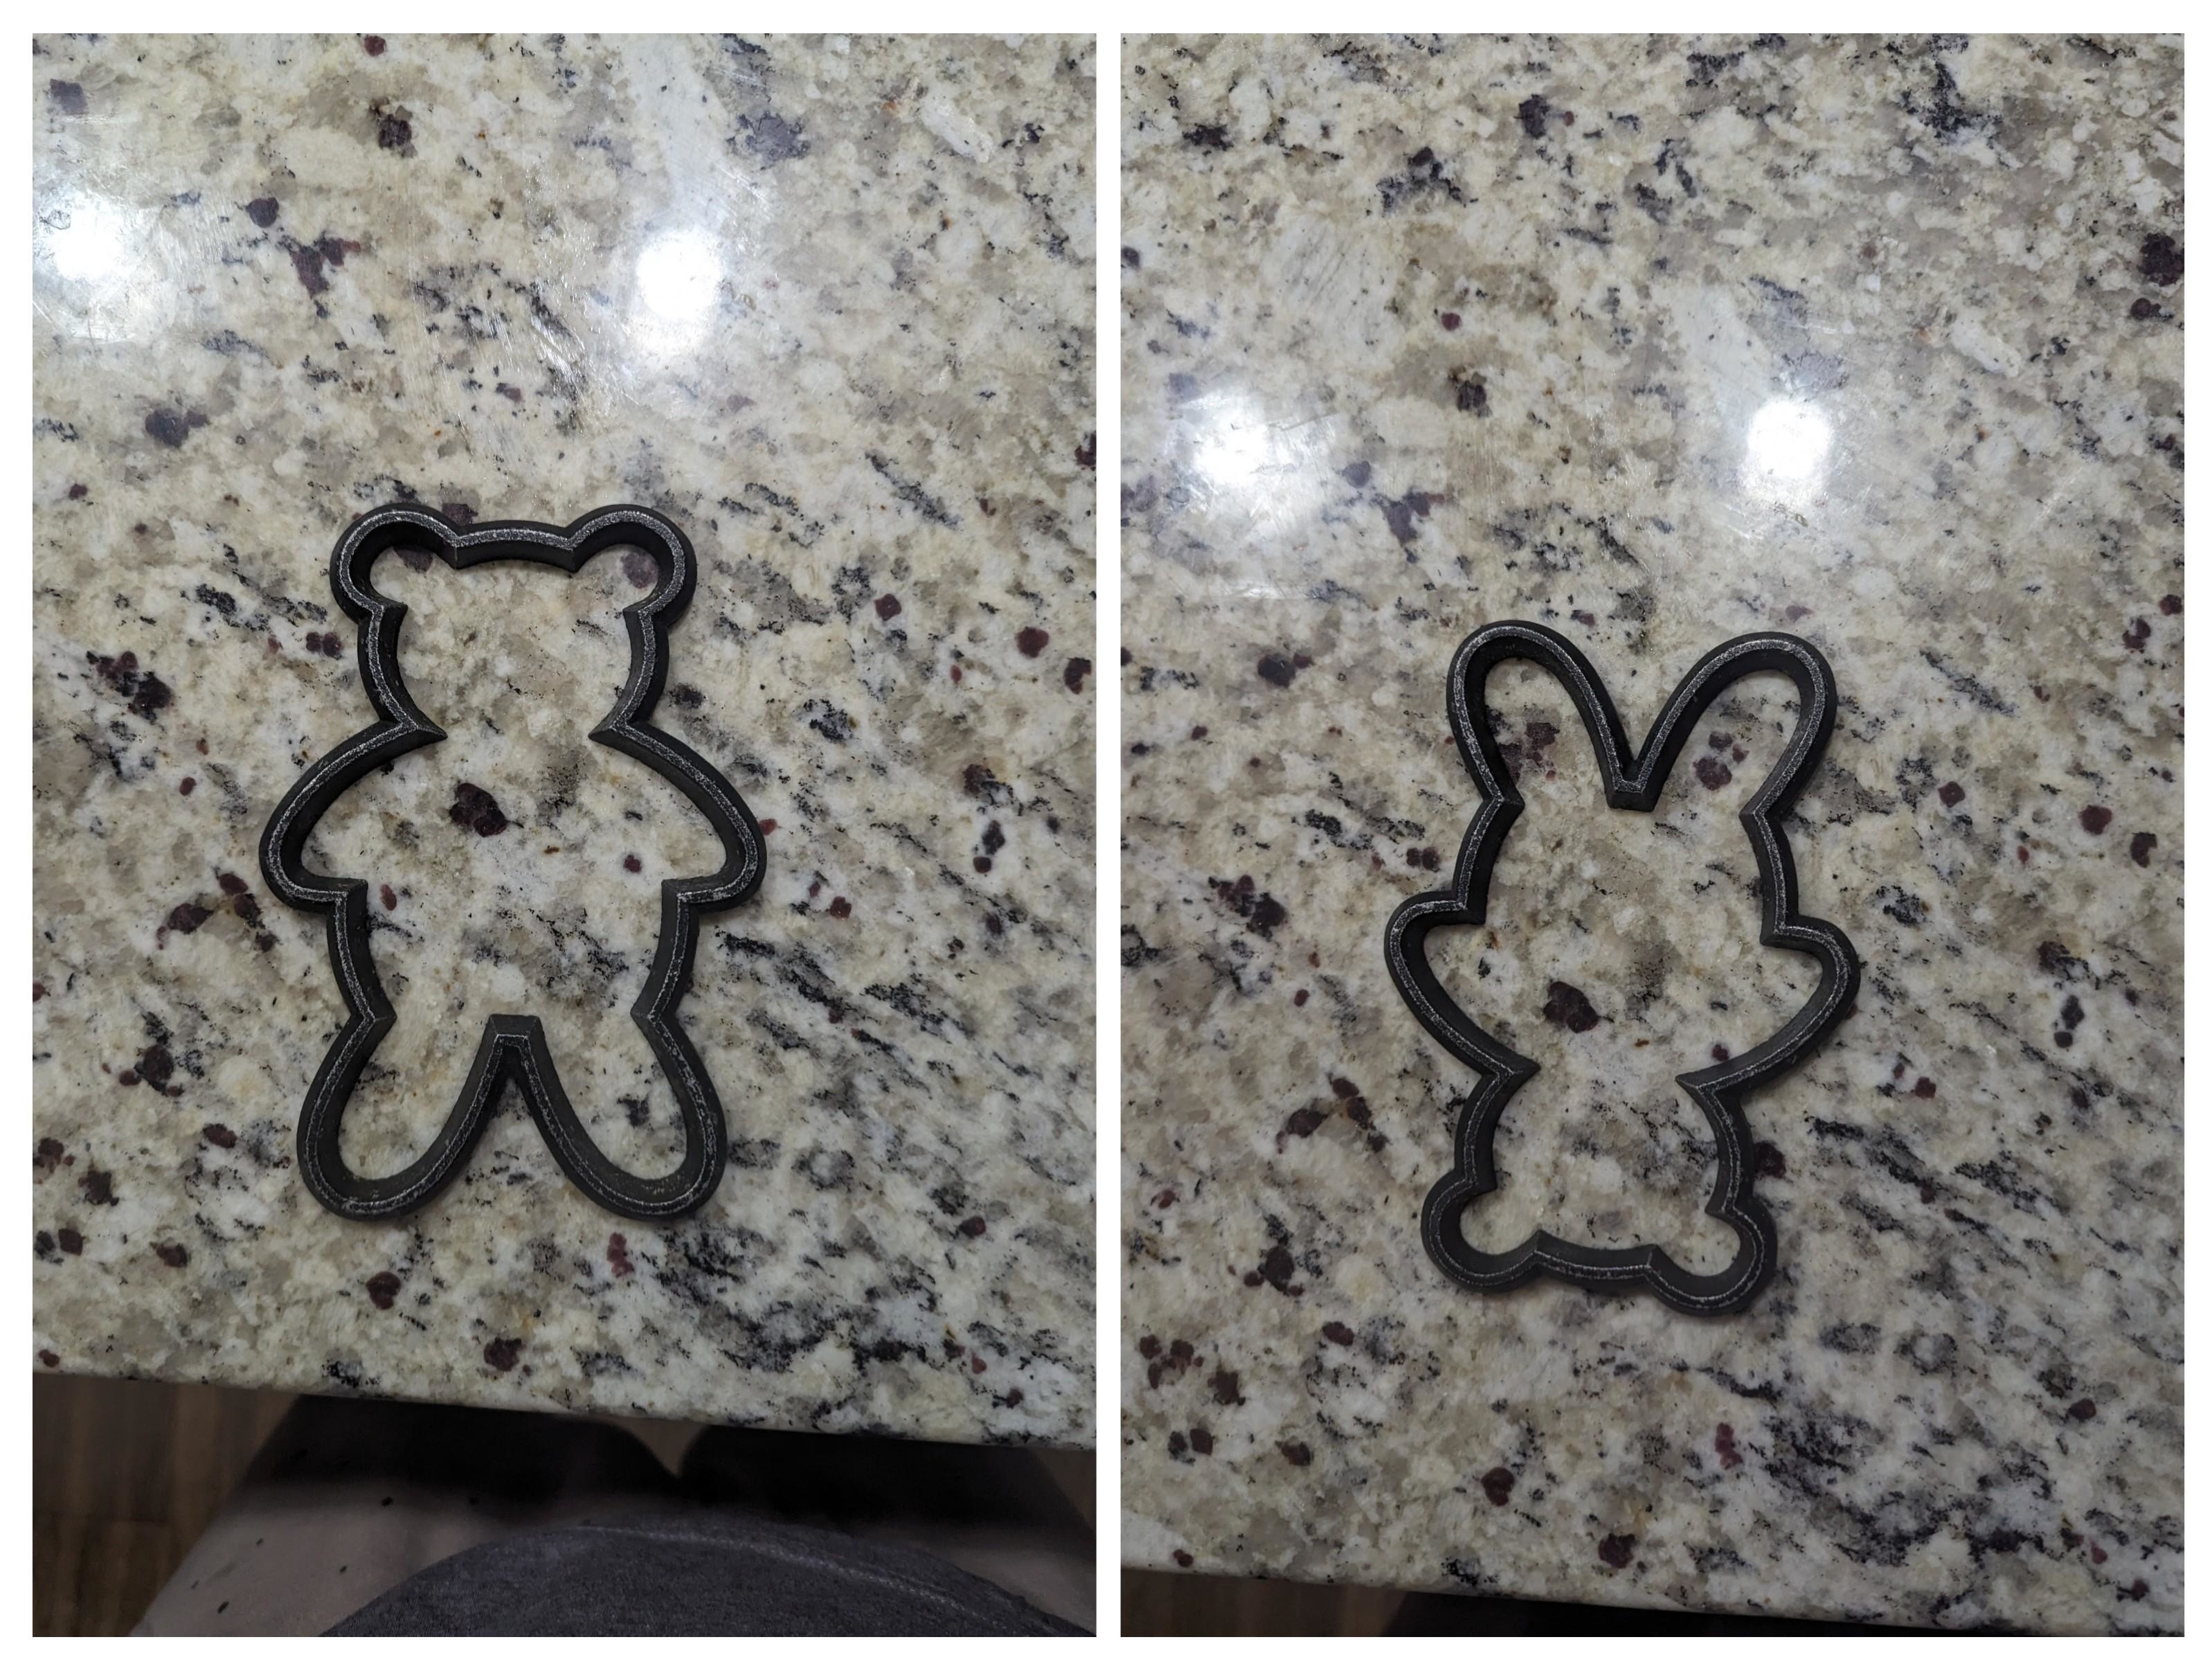 A cookie cutter that&#x27;s difficult to identify but looks like a bunny one way and a teddy bear upside down